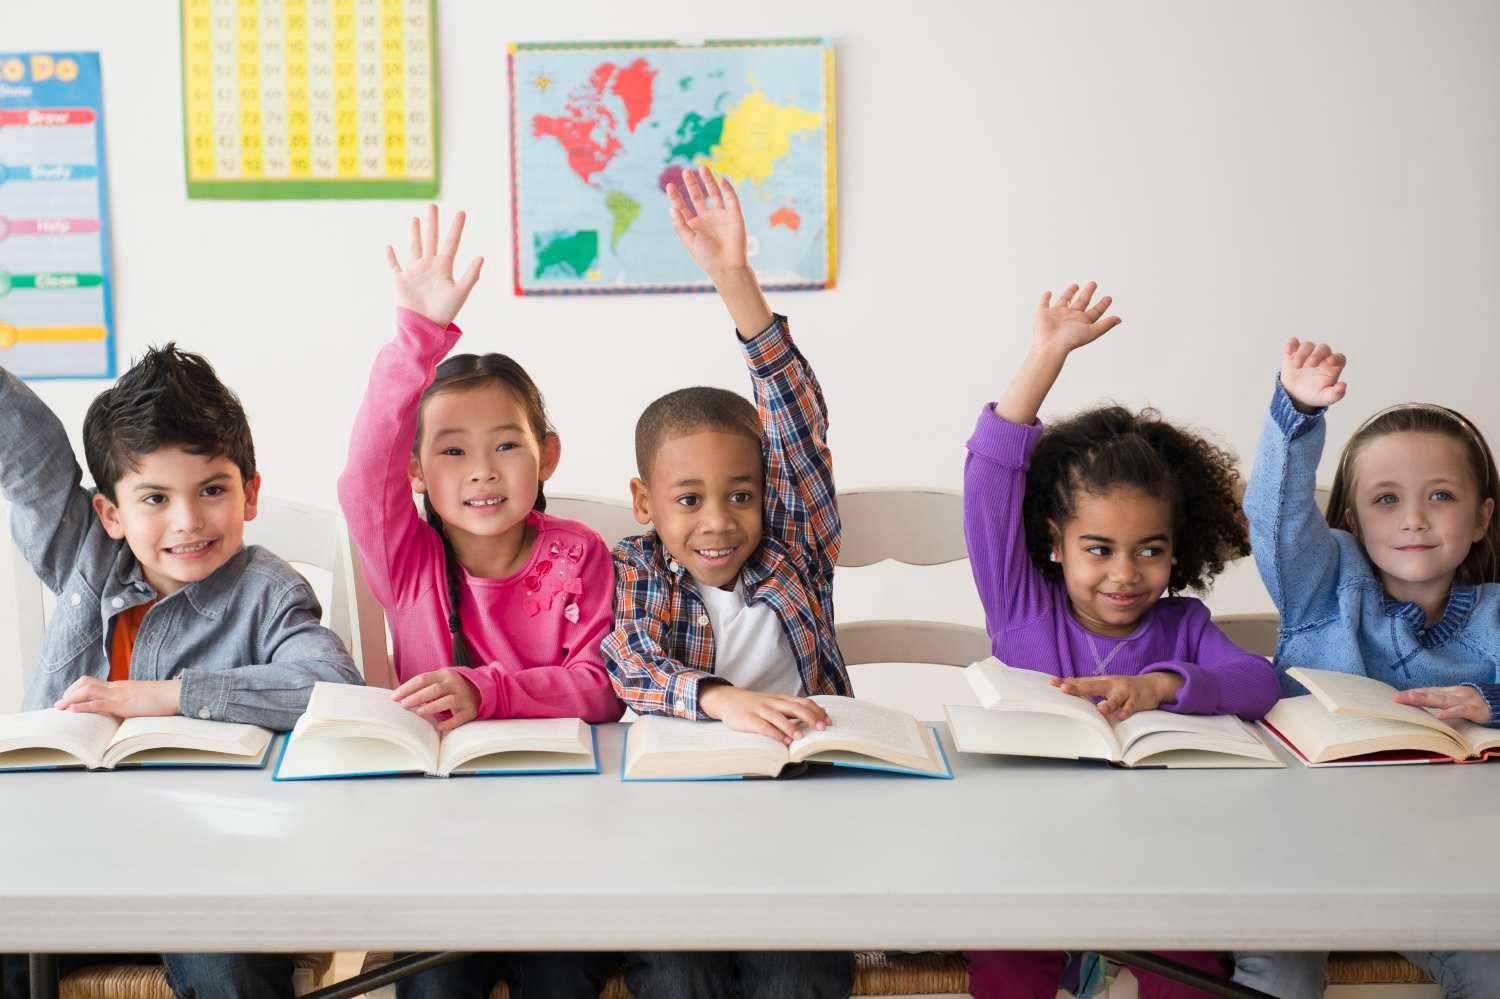 Young students in classroom with books raising hands